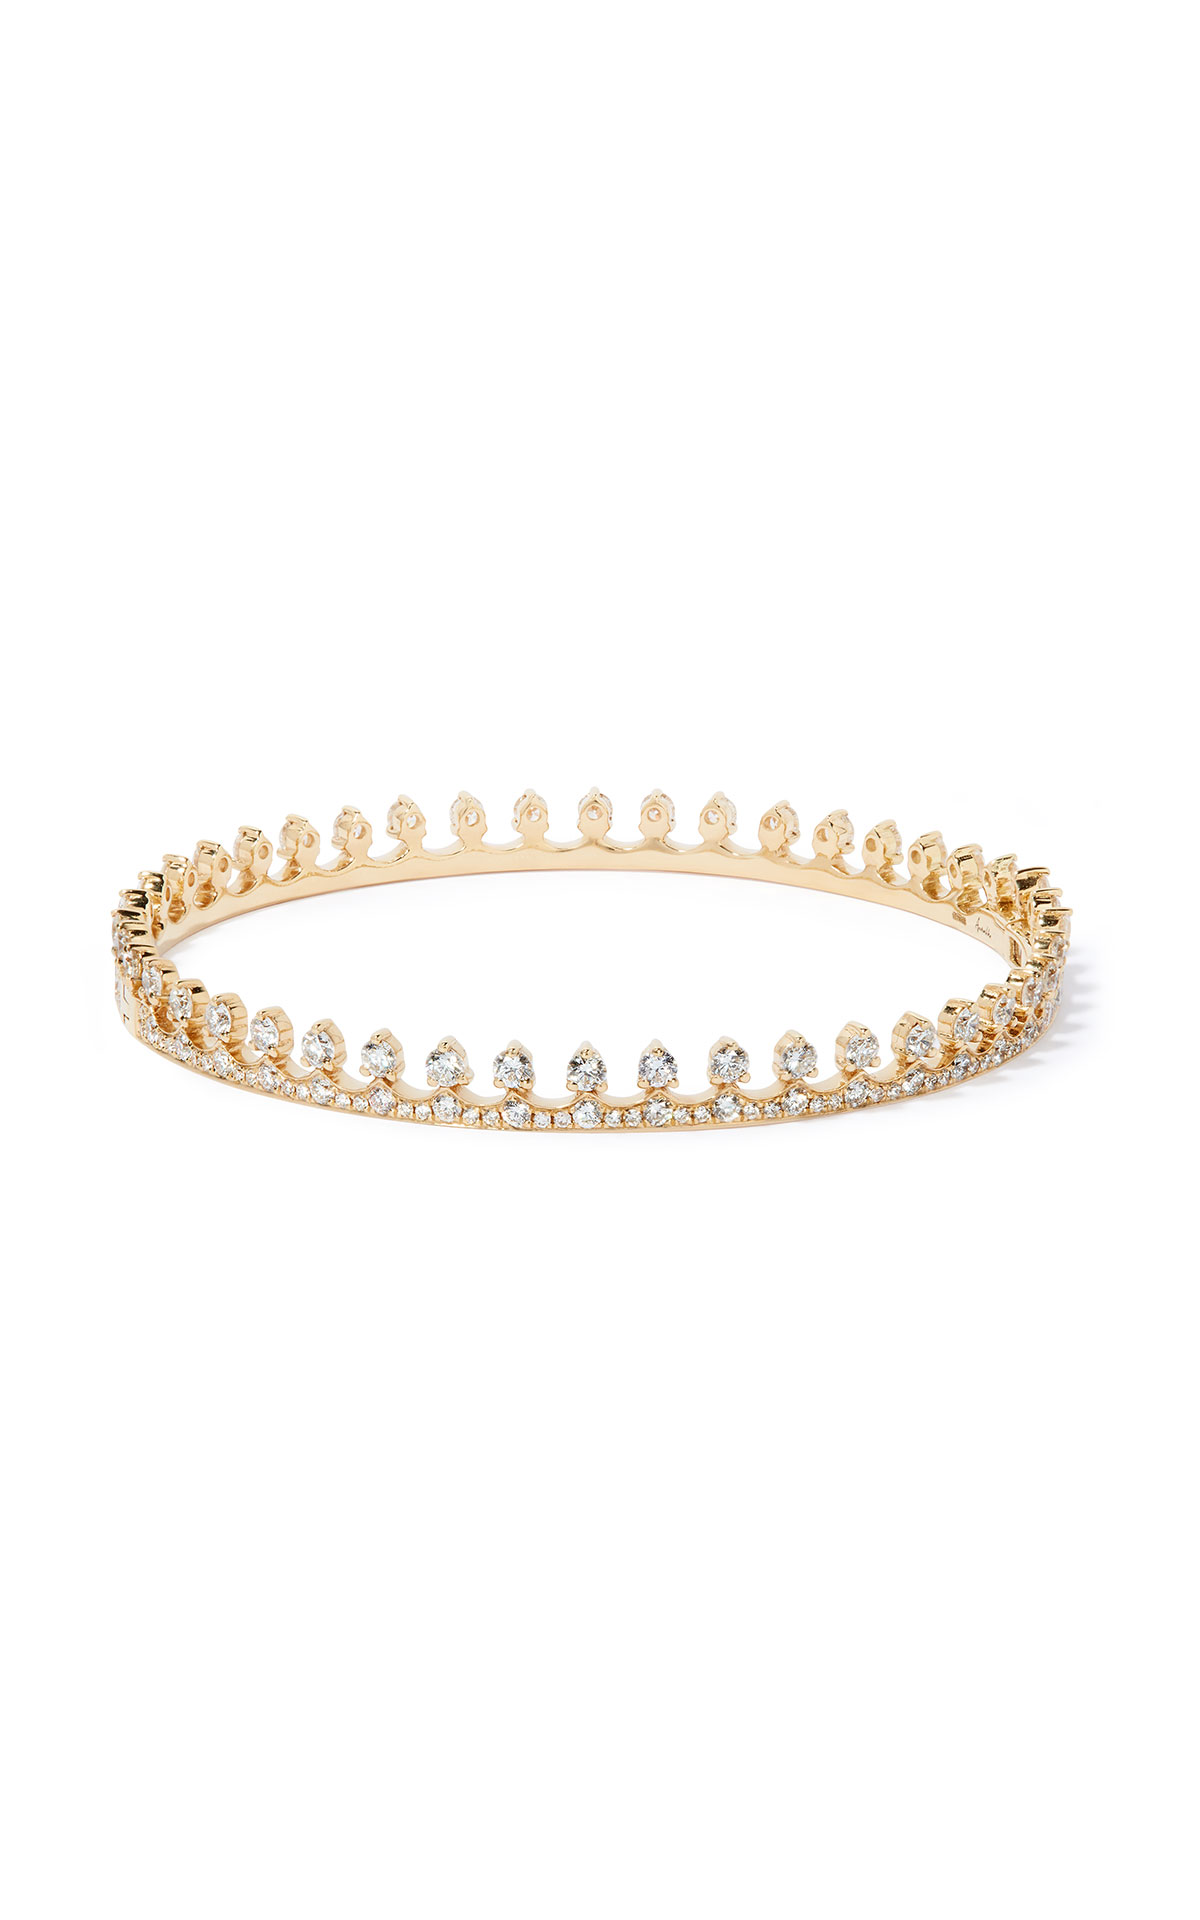 Annoushka 18ct yellow gold and diamon crown bangle from Bicester Village